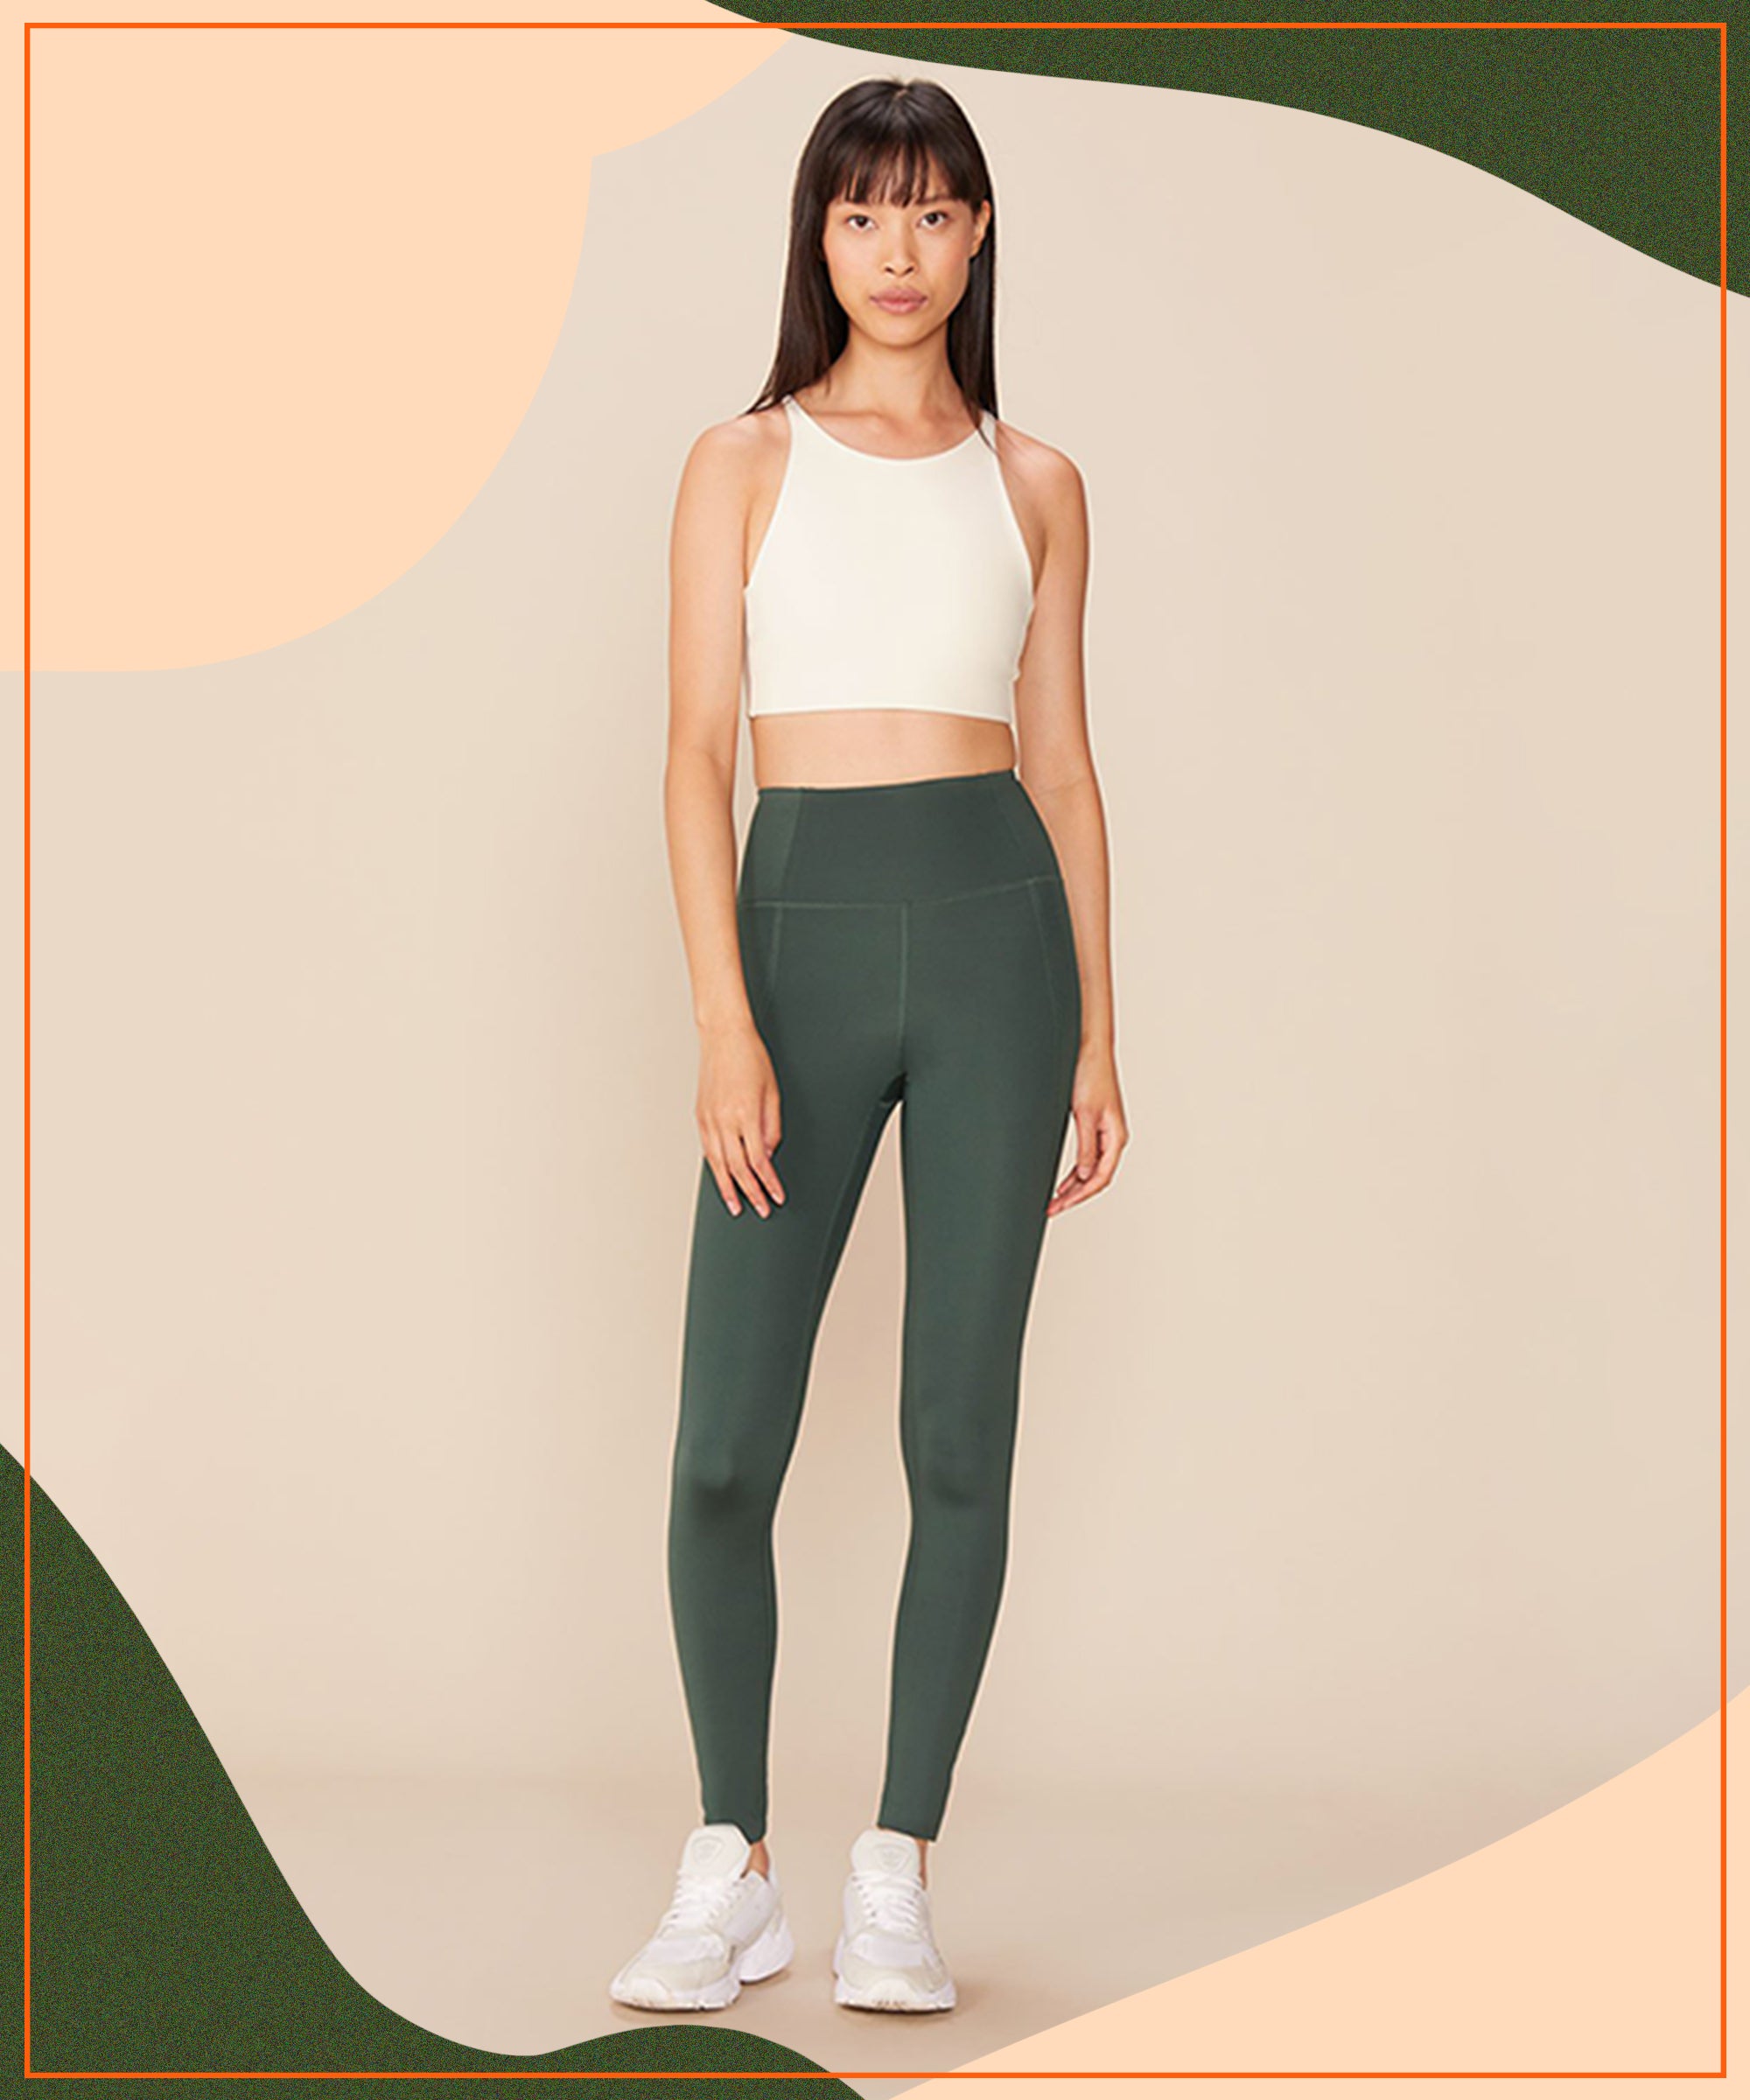 Girlfriend Collective, Summit Track Pant - Moss